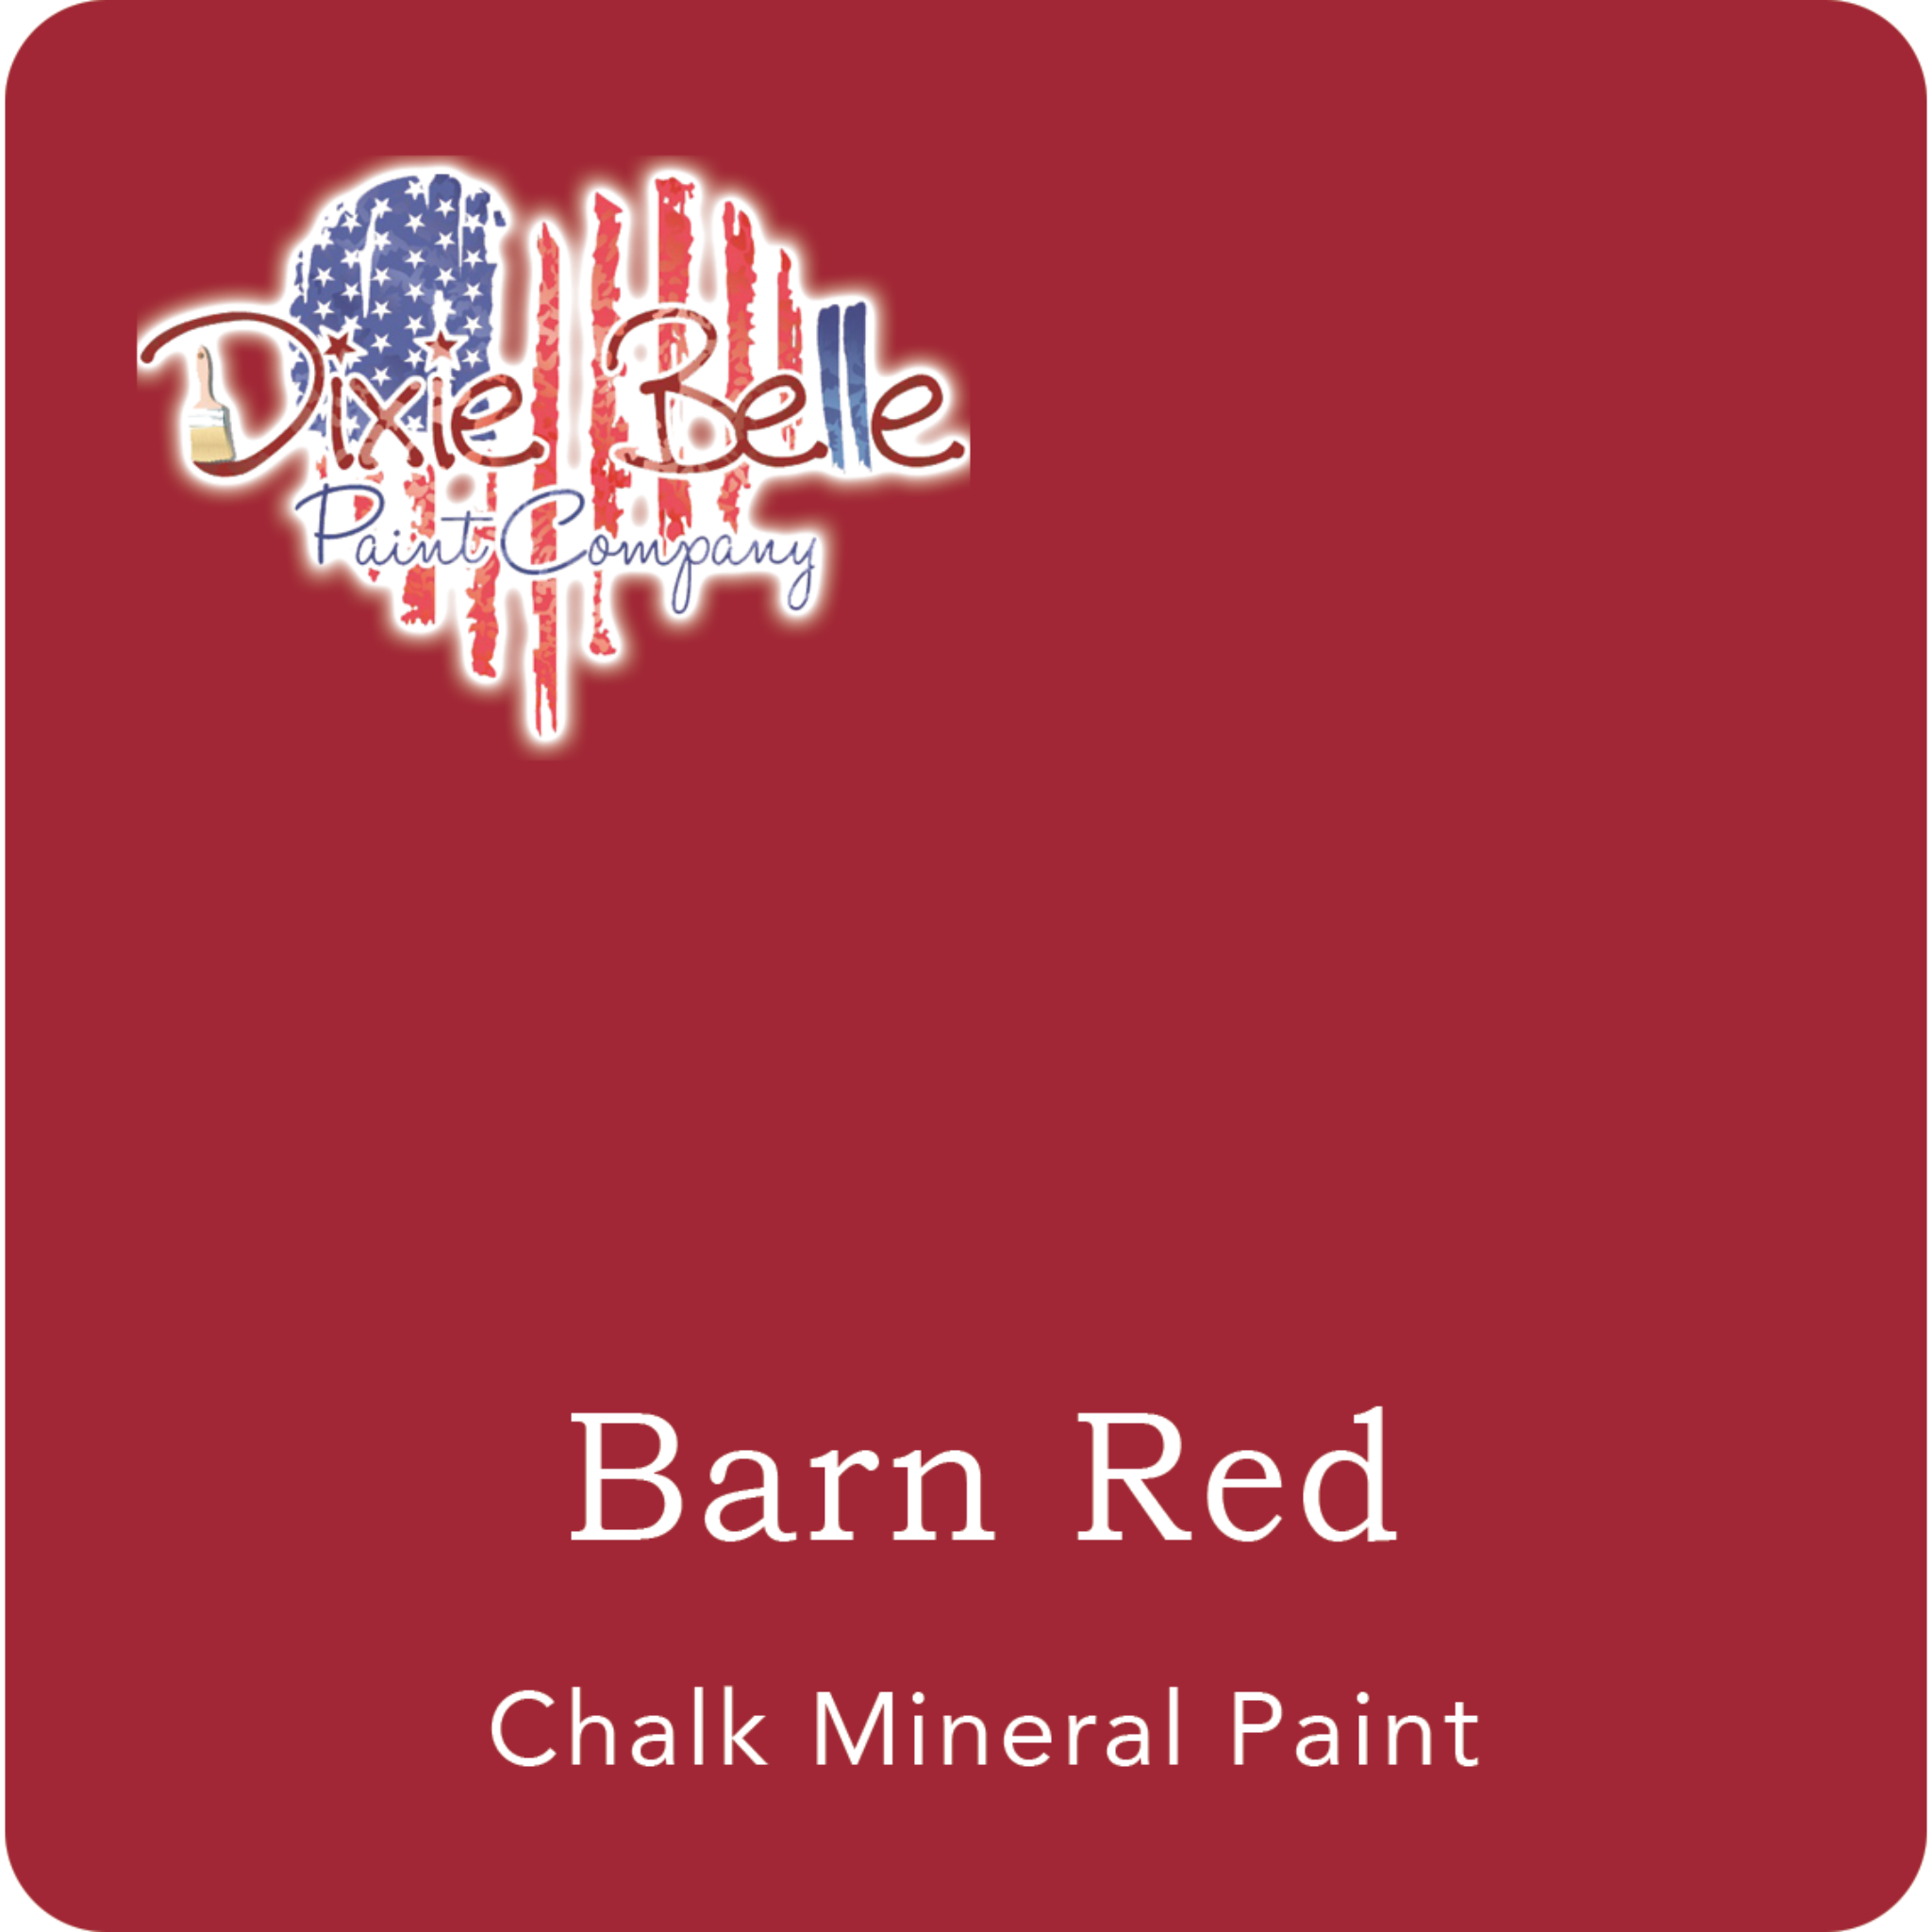 A square swatch card of Dixie Belle Paint Company’s Barn Red Chalk Mineral Paint. This color is a warm red.